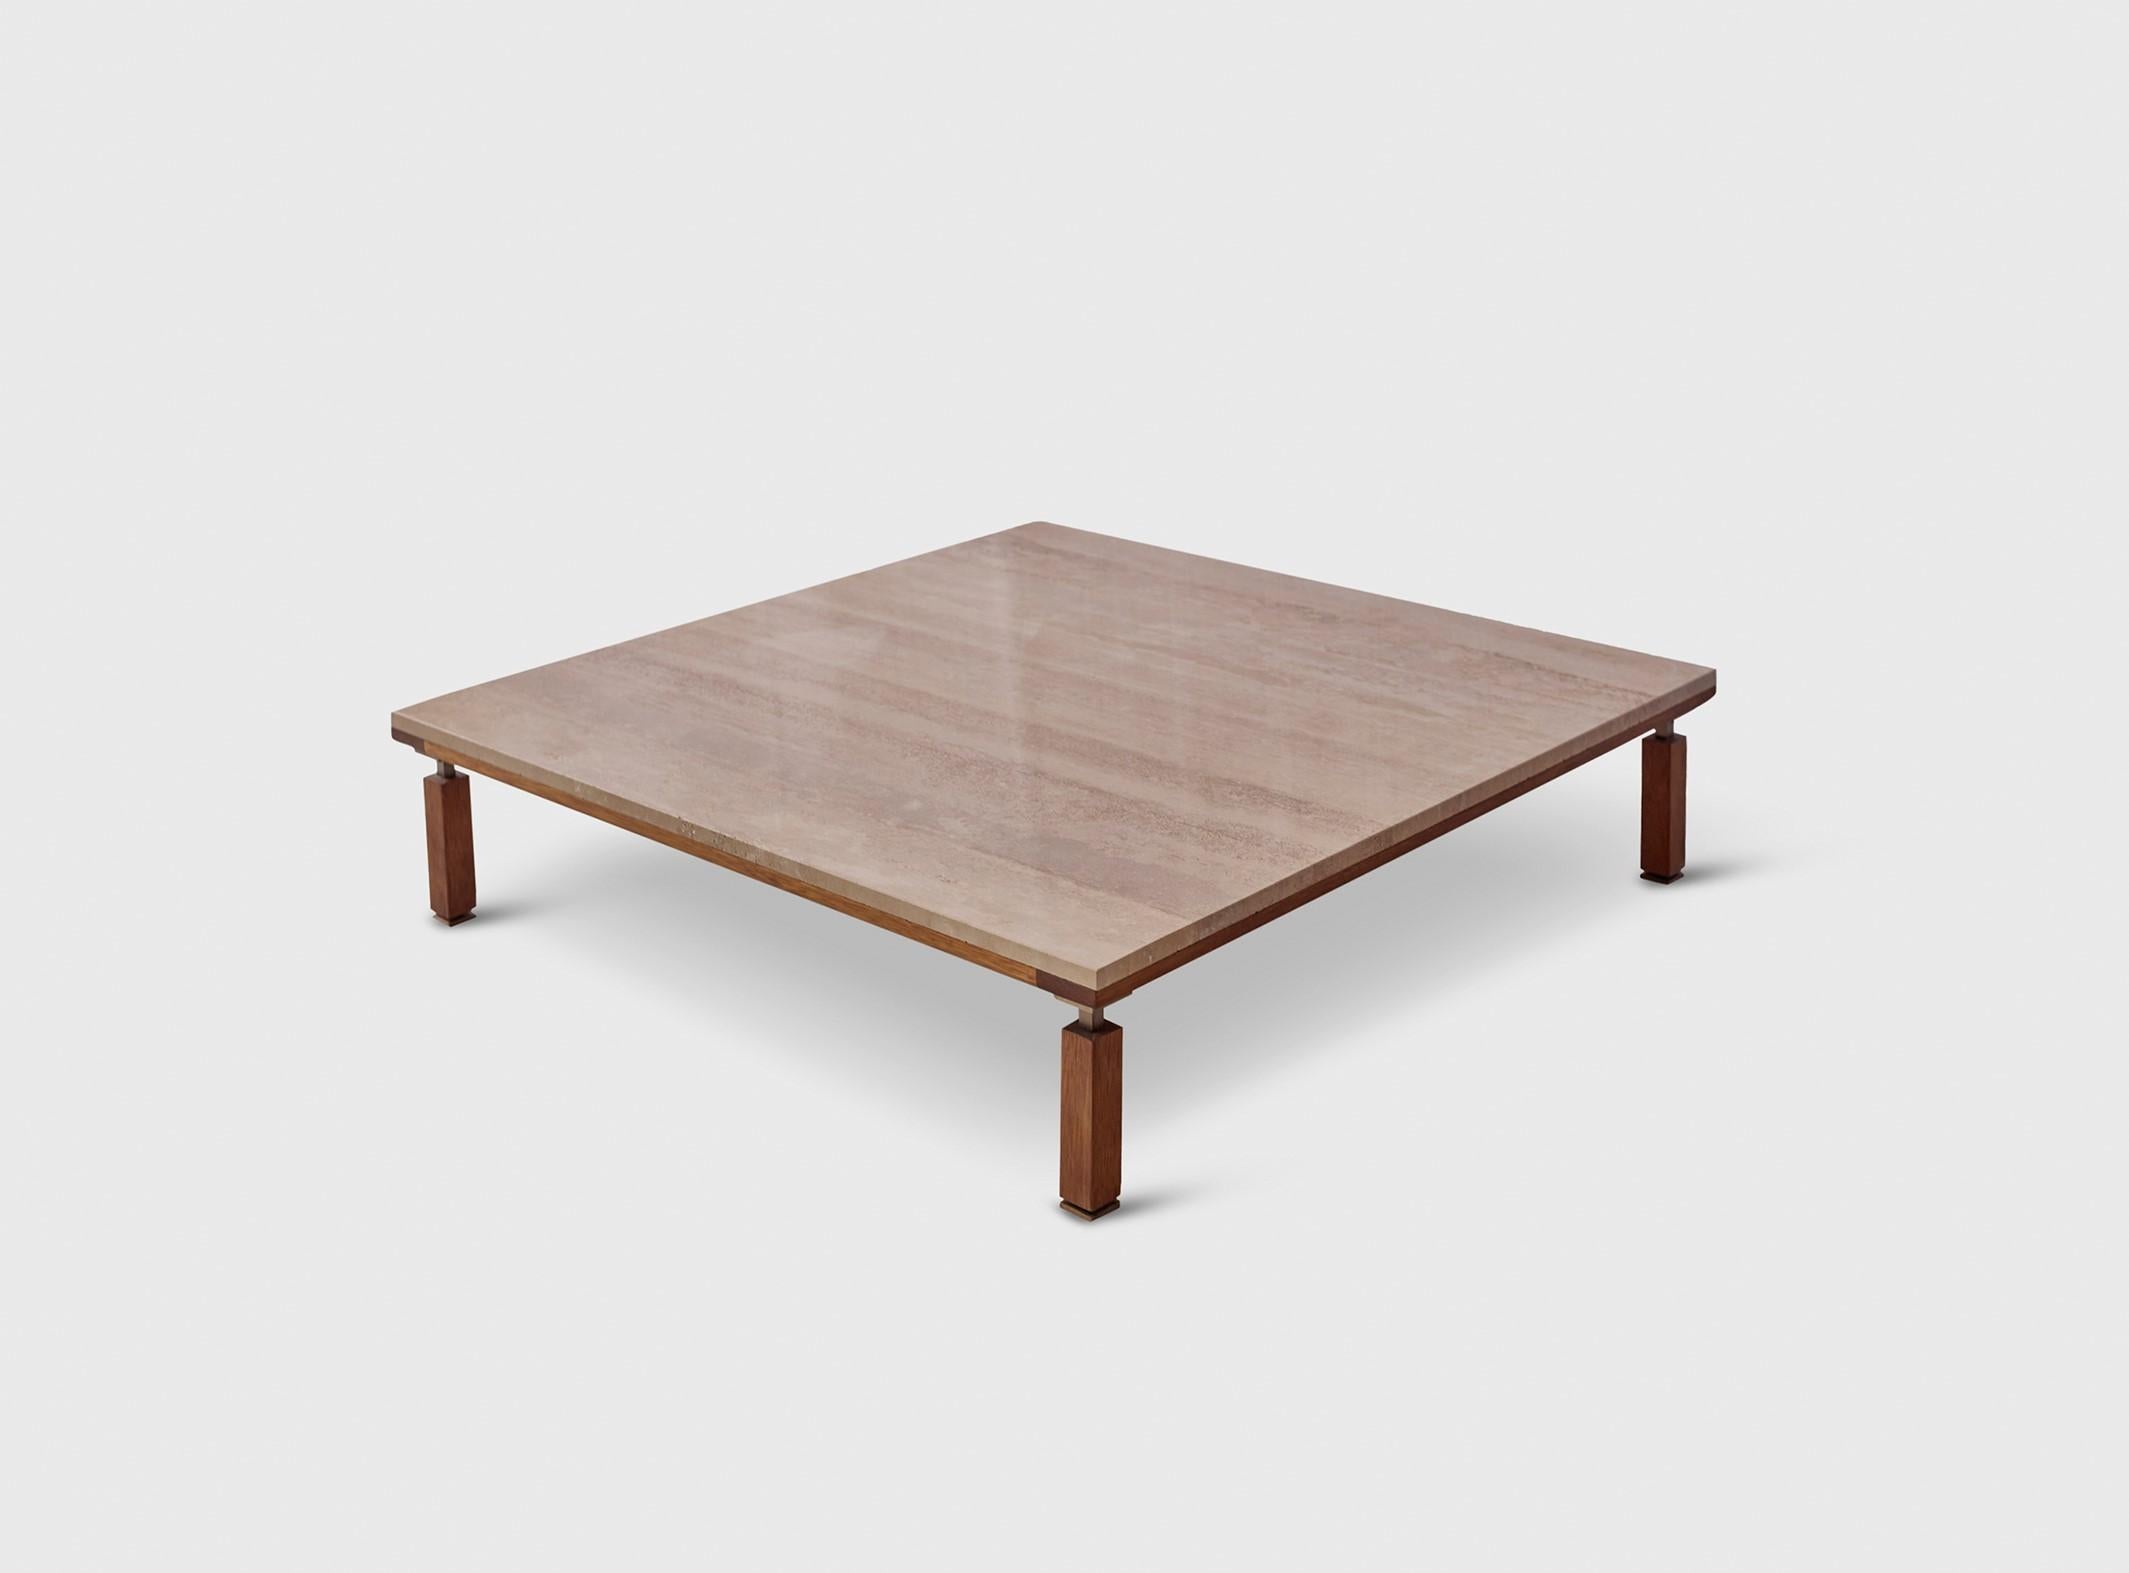 Nerthus coffee table by Atra Design
Dimensions: D 108.5 x W 108.5 x H 38 cm
Materials: mahogany wood, marble, steel.

Atra Design
We are Atra, a furniture brand produced by Atra form a mexico city–based high end production facility that also houses